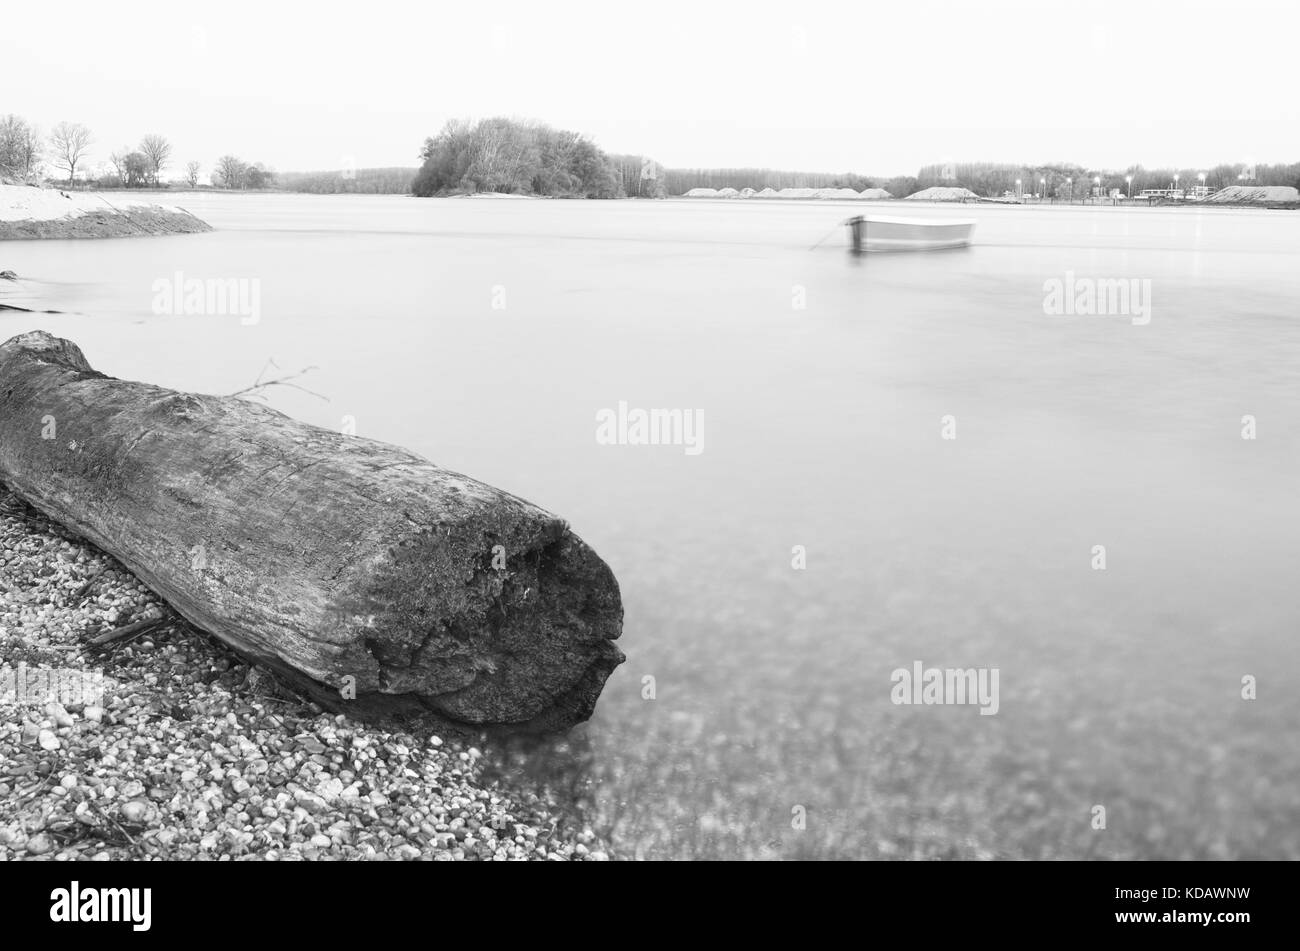 Driftwood Log and Empty Boat on the Danube River Stock Photo